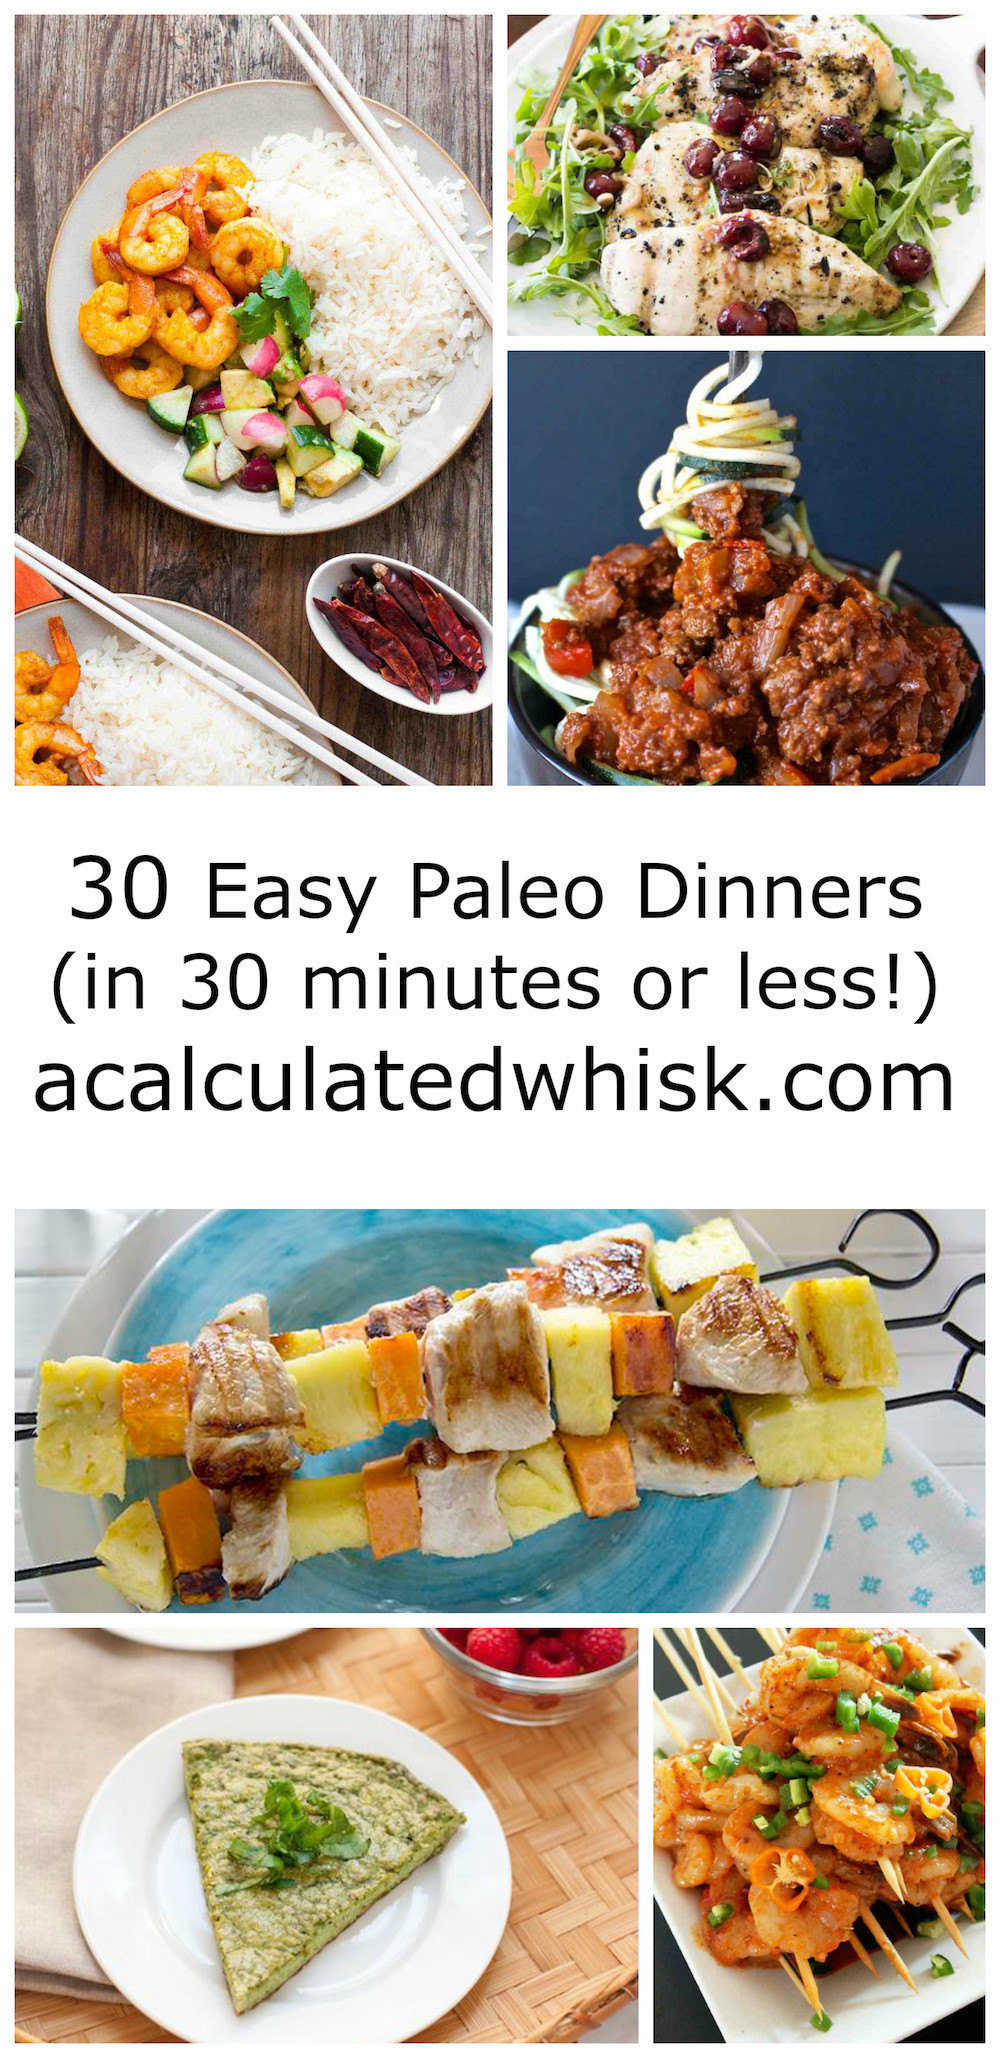 Easy Paleo Dinner
 30 Easy Paleo Dinners in 30 minutes or less A